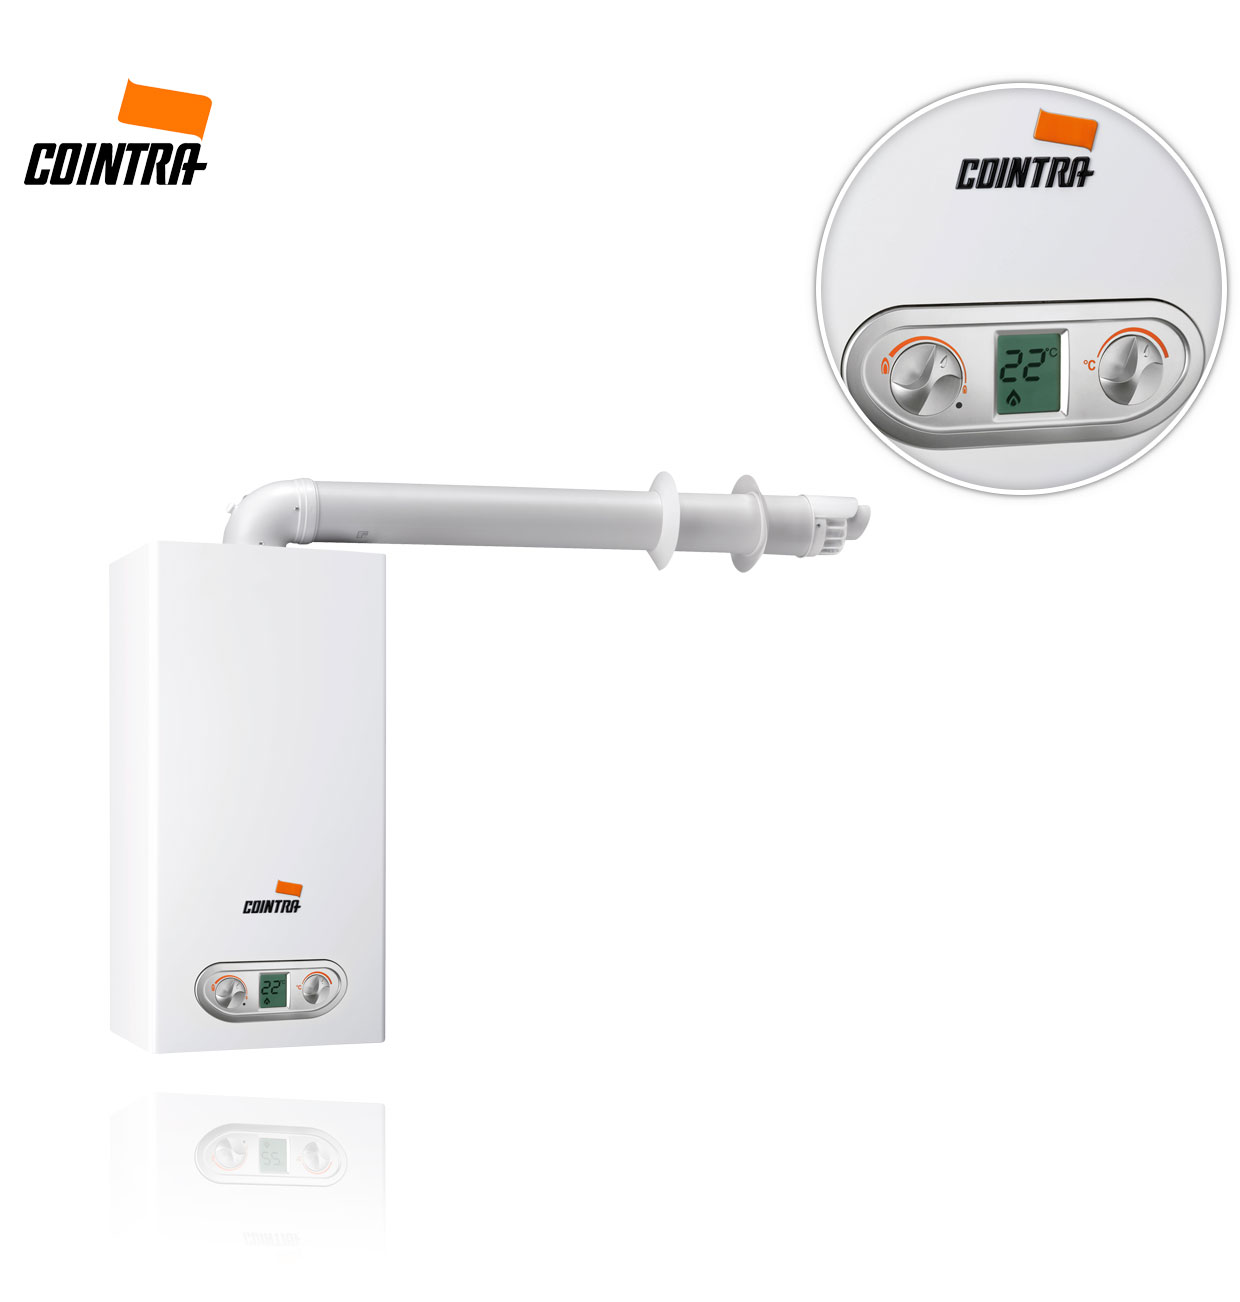 COINTRA SUPREME-14 E PLUS P (PROPANE GAS) + STANDARD SEALED HEATER GAS OUTLET KIT